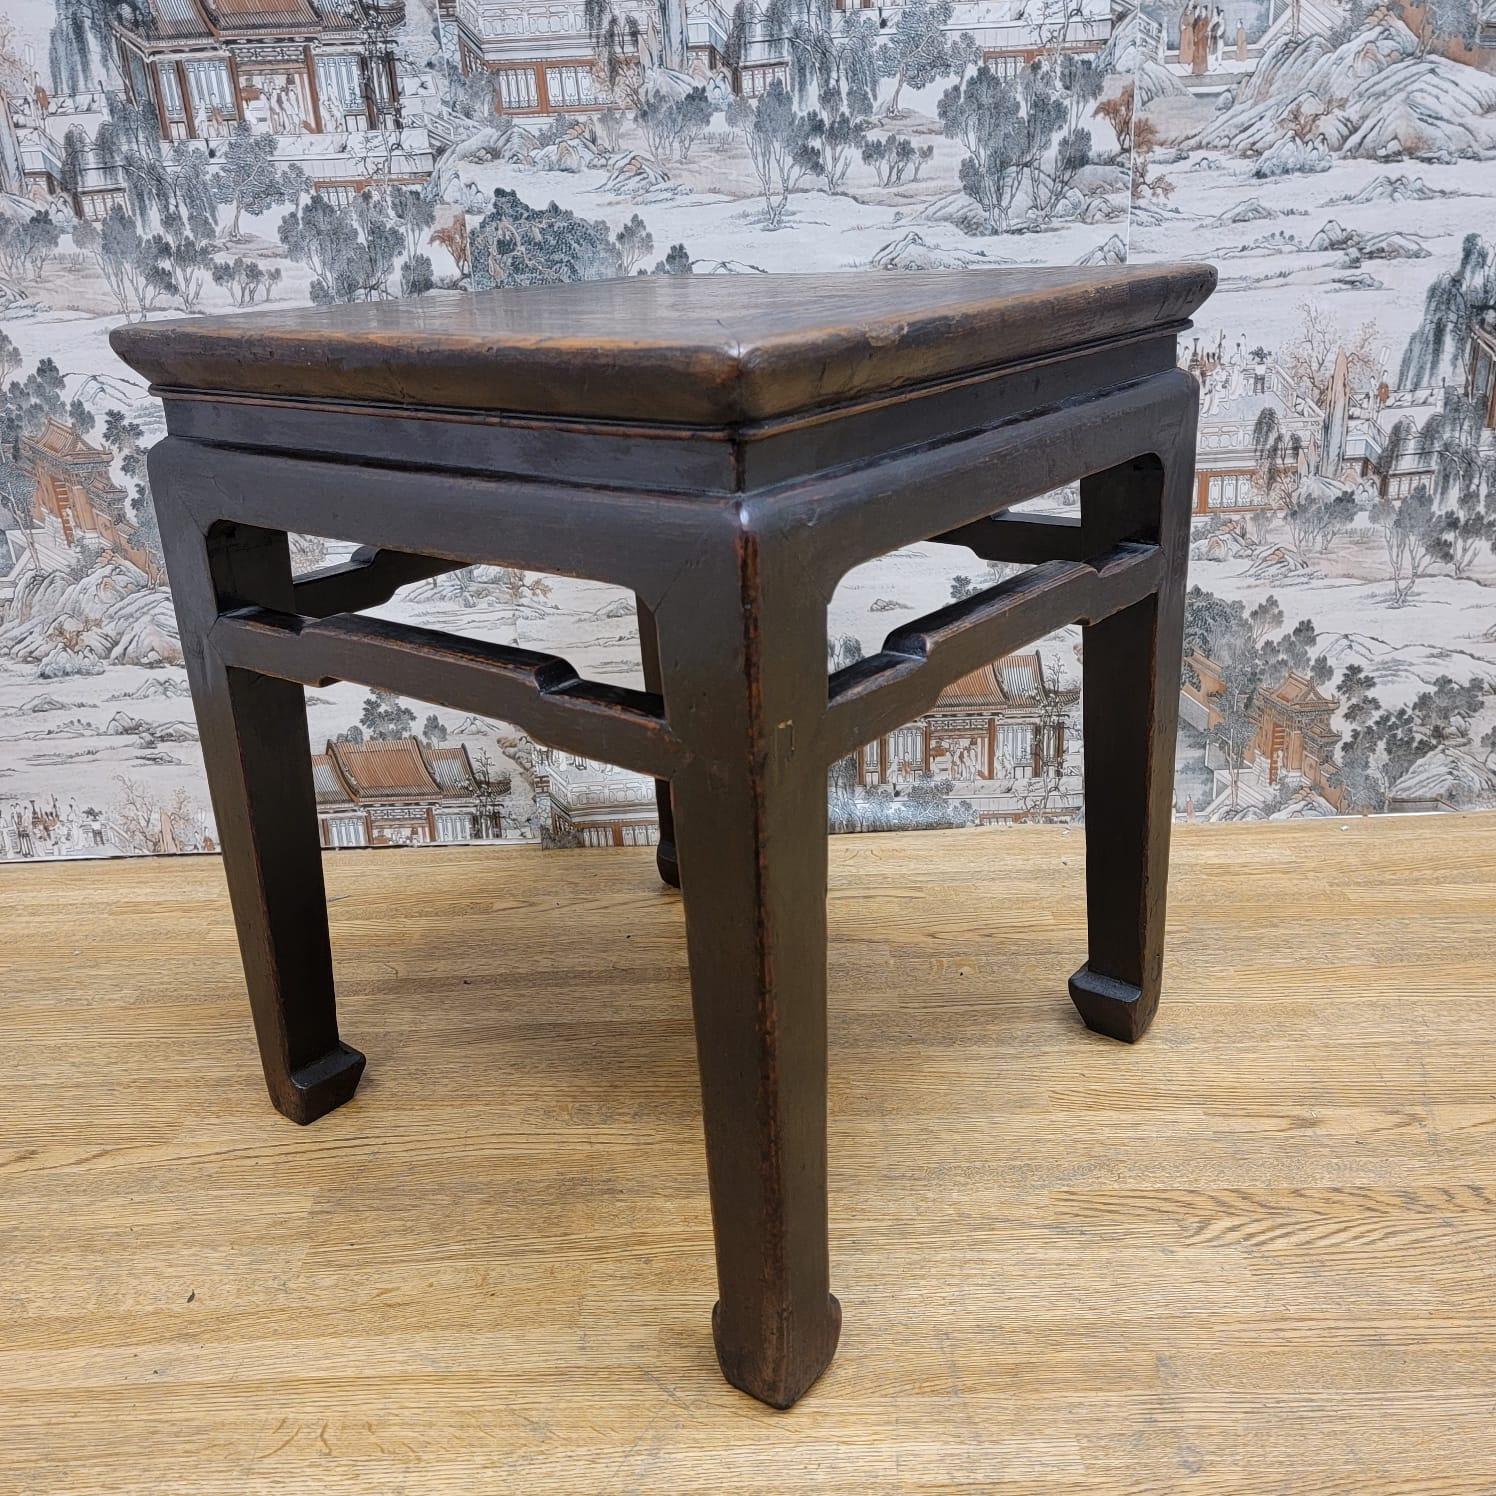 Antique Shanxi Province elm square side table - pair

These rare side tables are from the Shanxi Province of China. They are made of elm and have their original color and patina.

Circa 1900

Measures: H 21”
W 20”
D 20”.